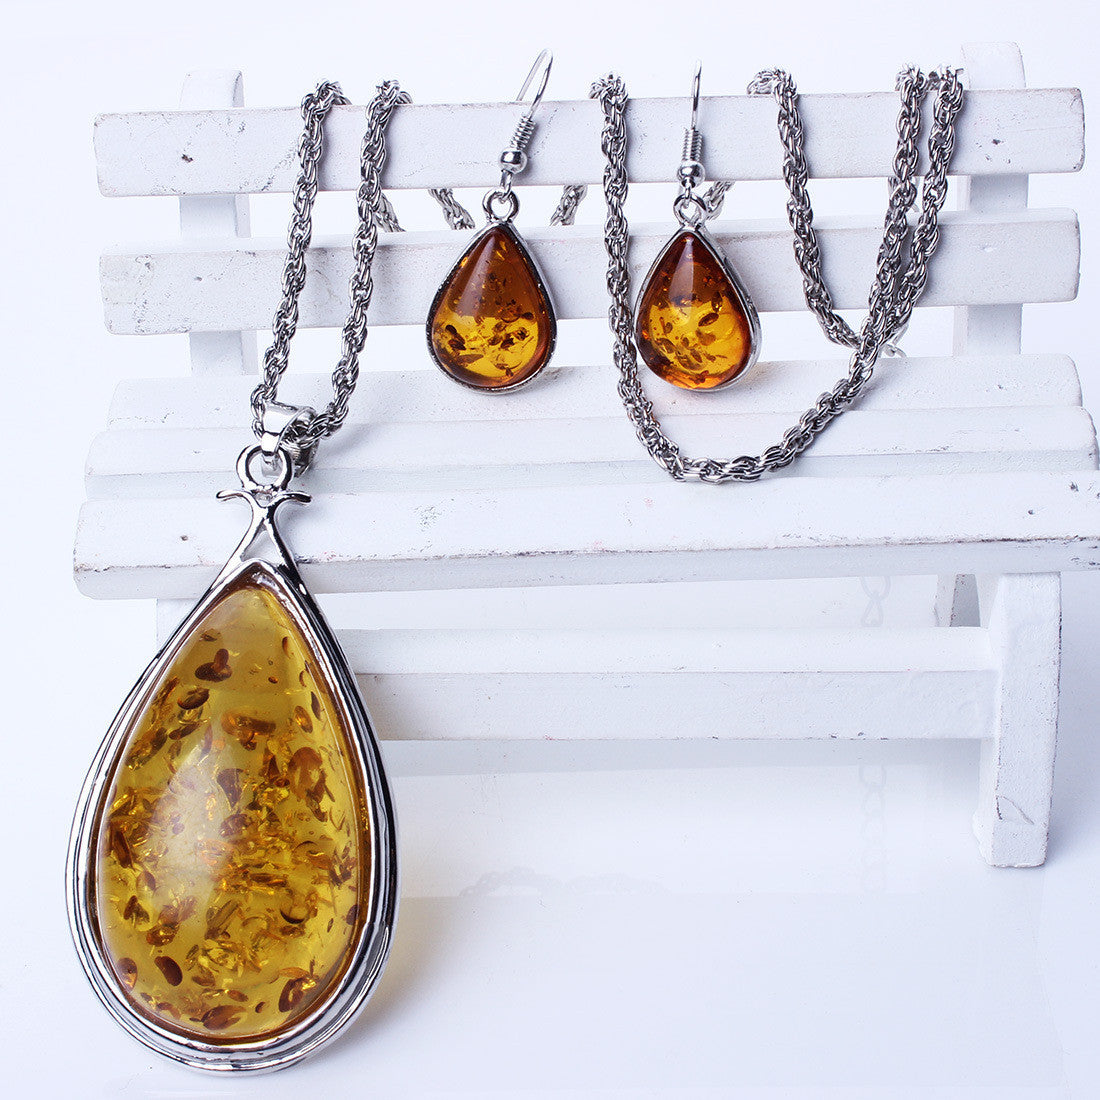 Drop Imitation Amber Necklace Earrings Jewelry Set - Oh Yours Fashion - 2